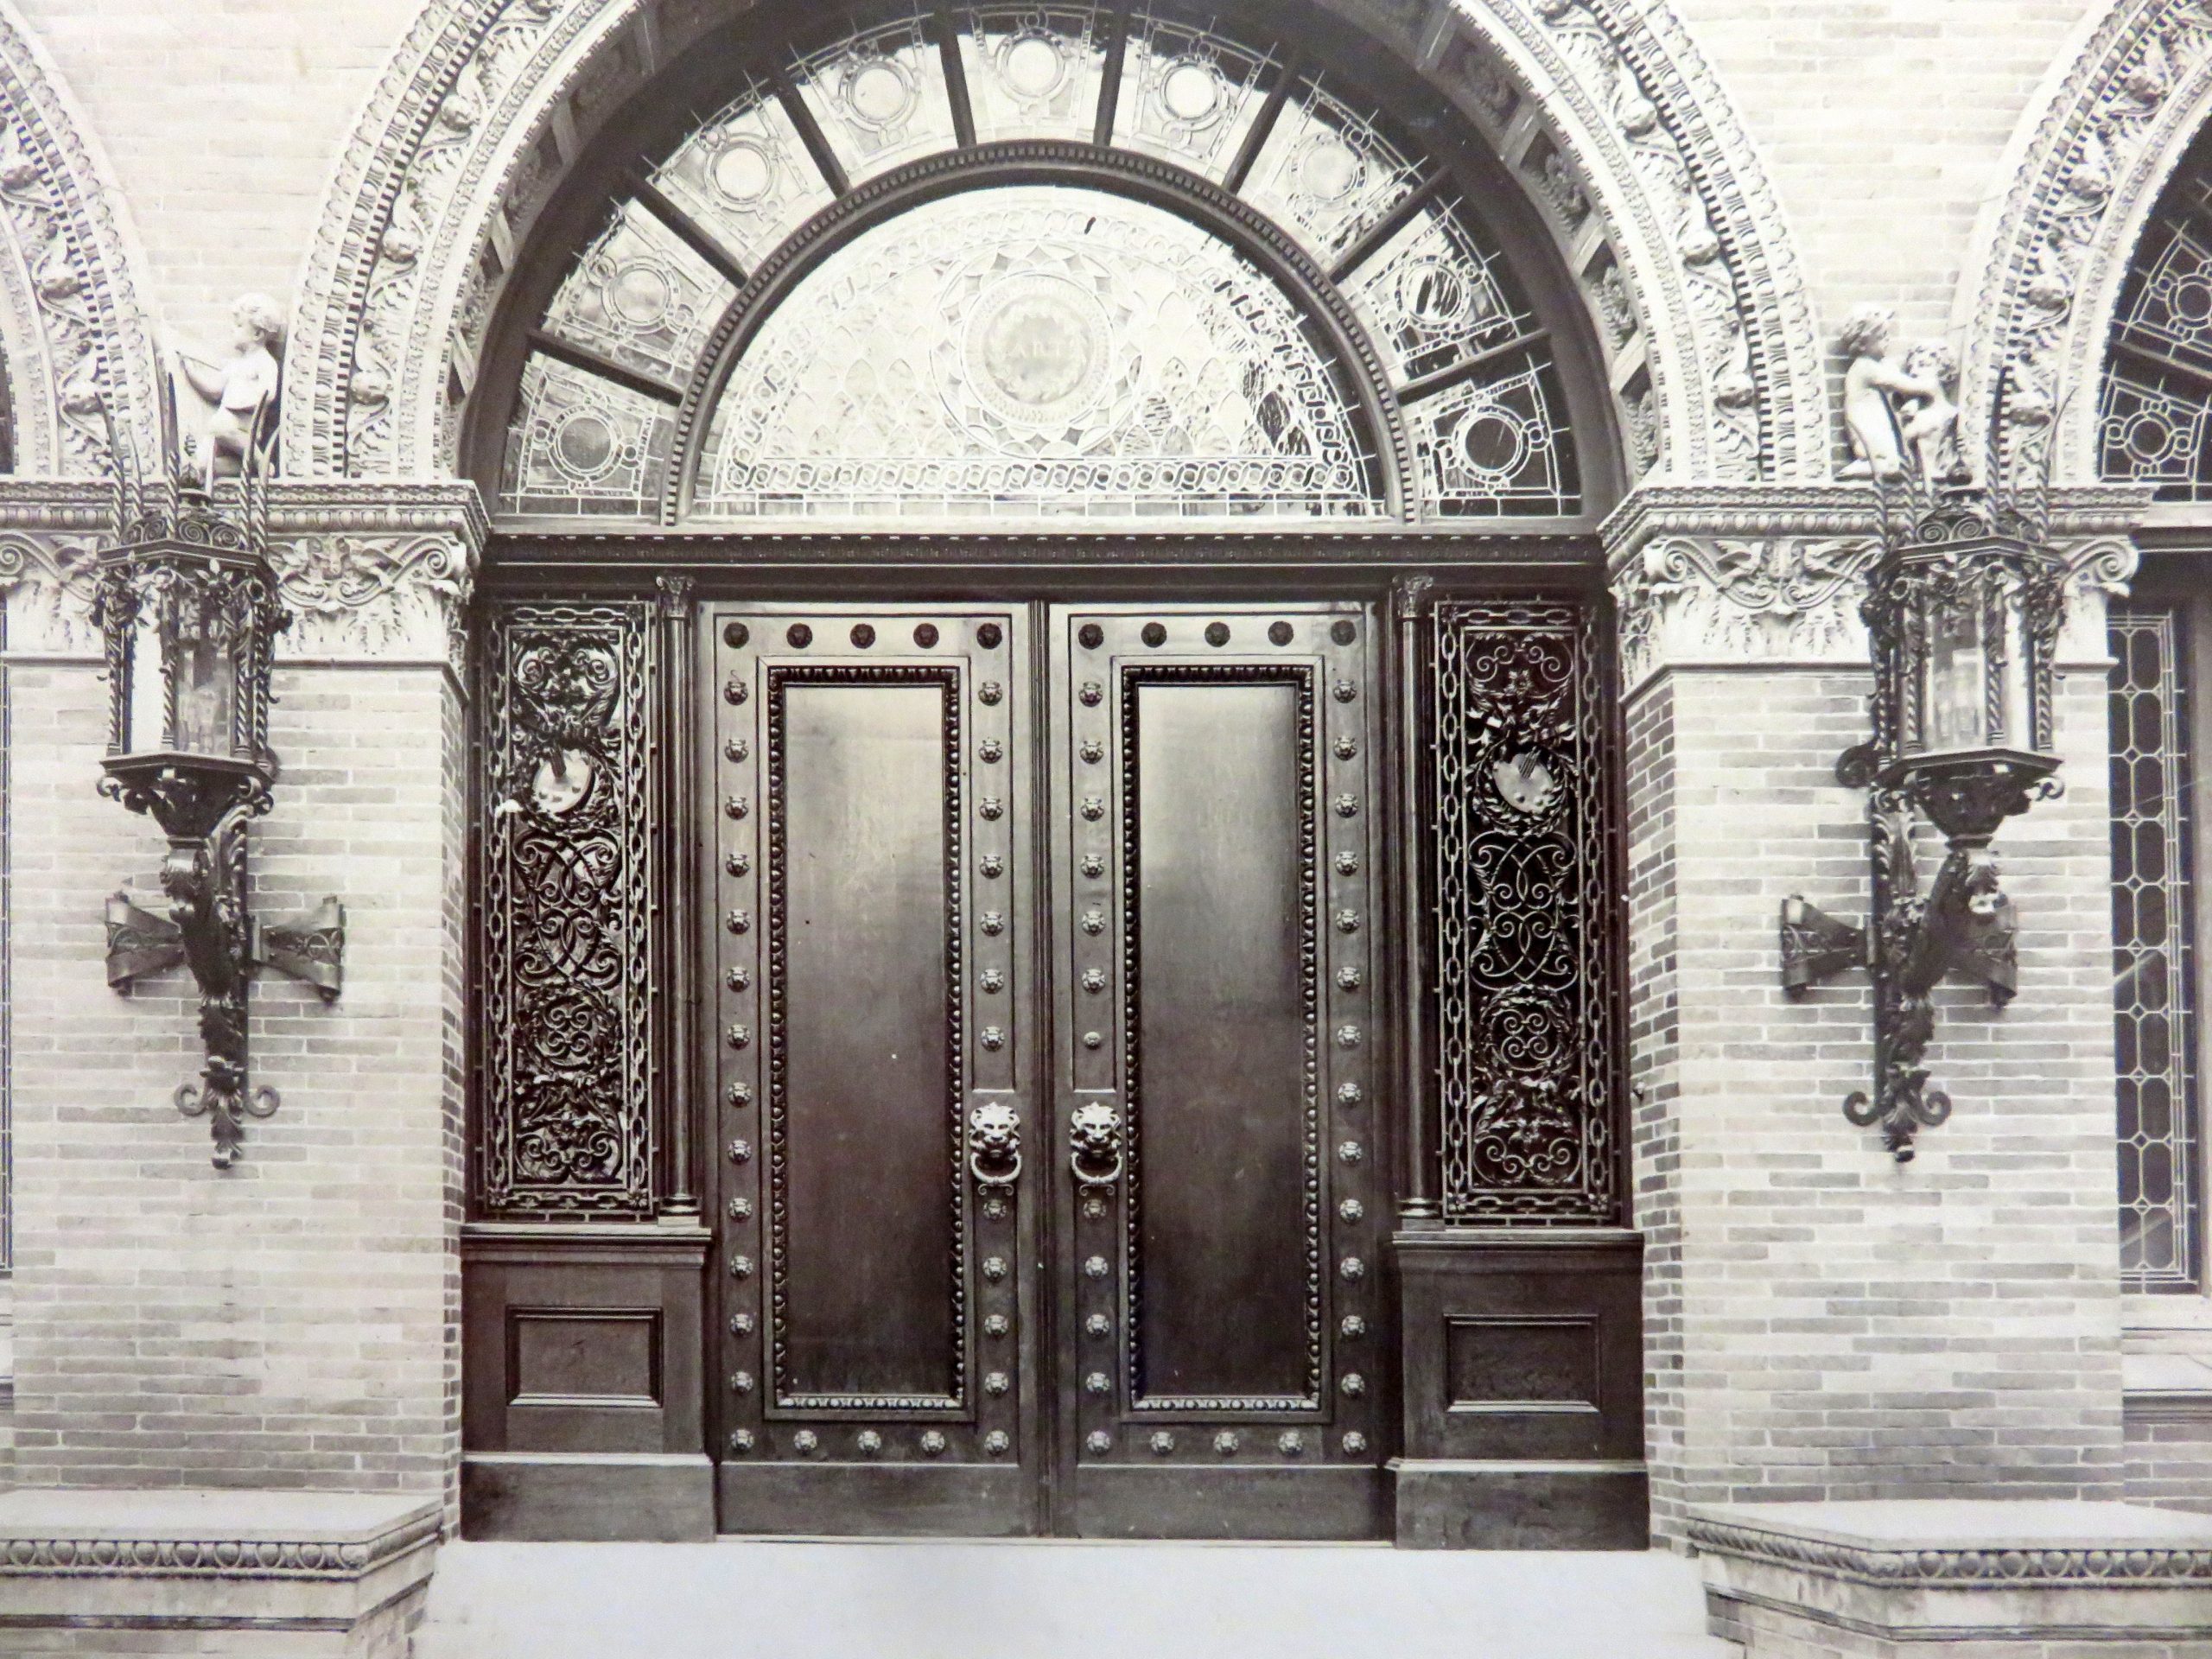 Historic image of the front doors of the George Walter Vincent Smith Museums pre-renovation